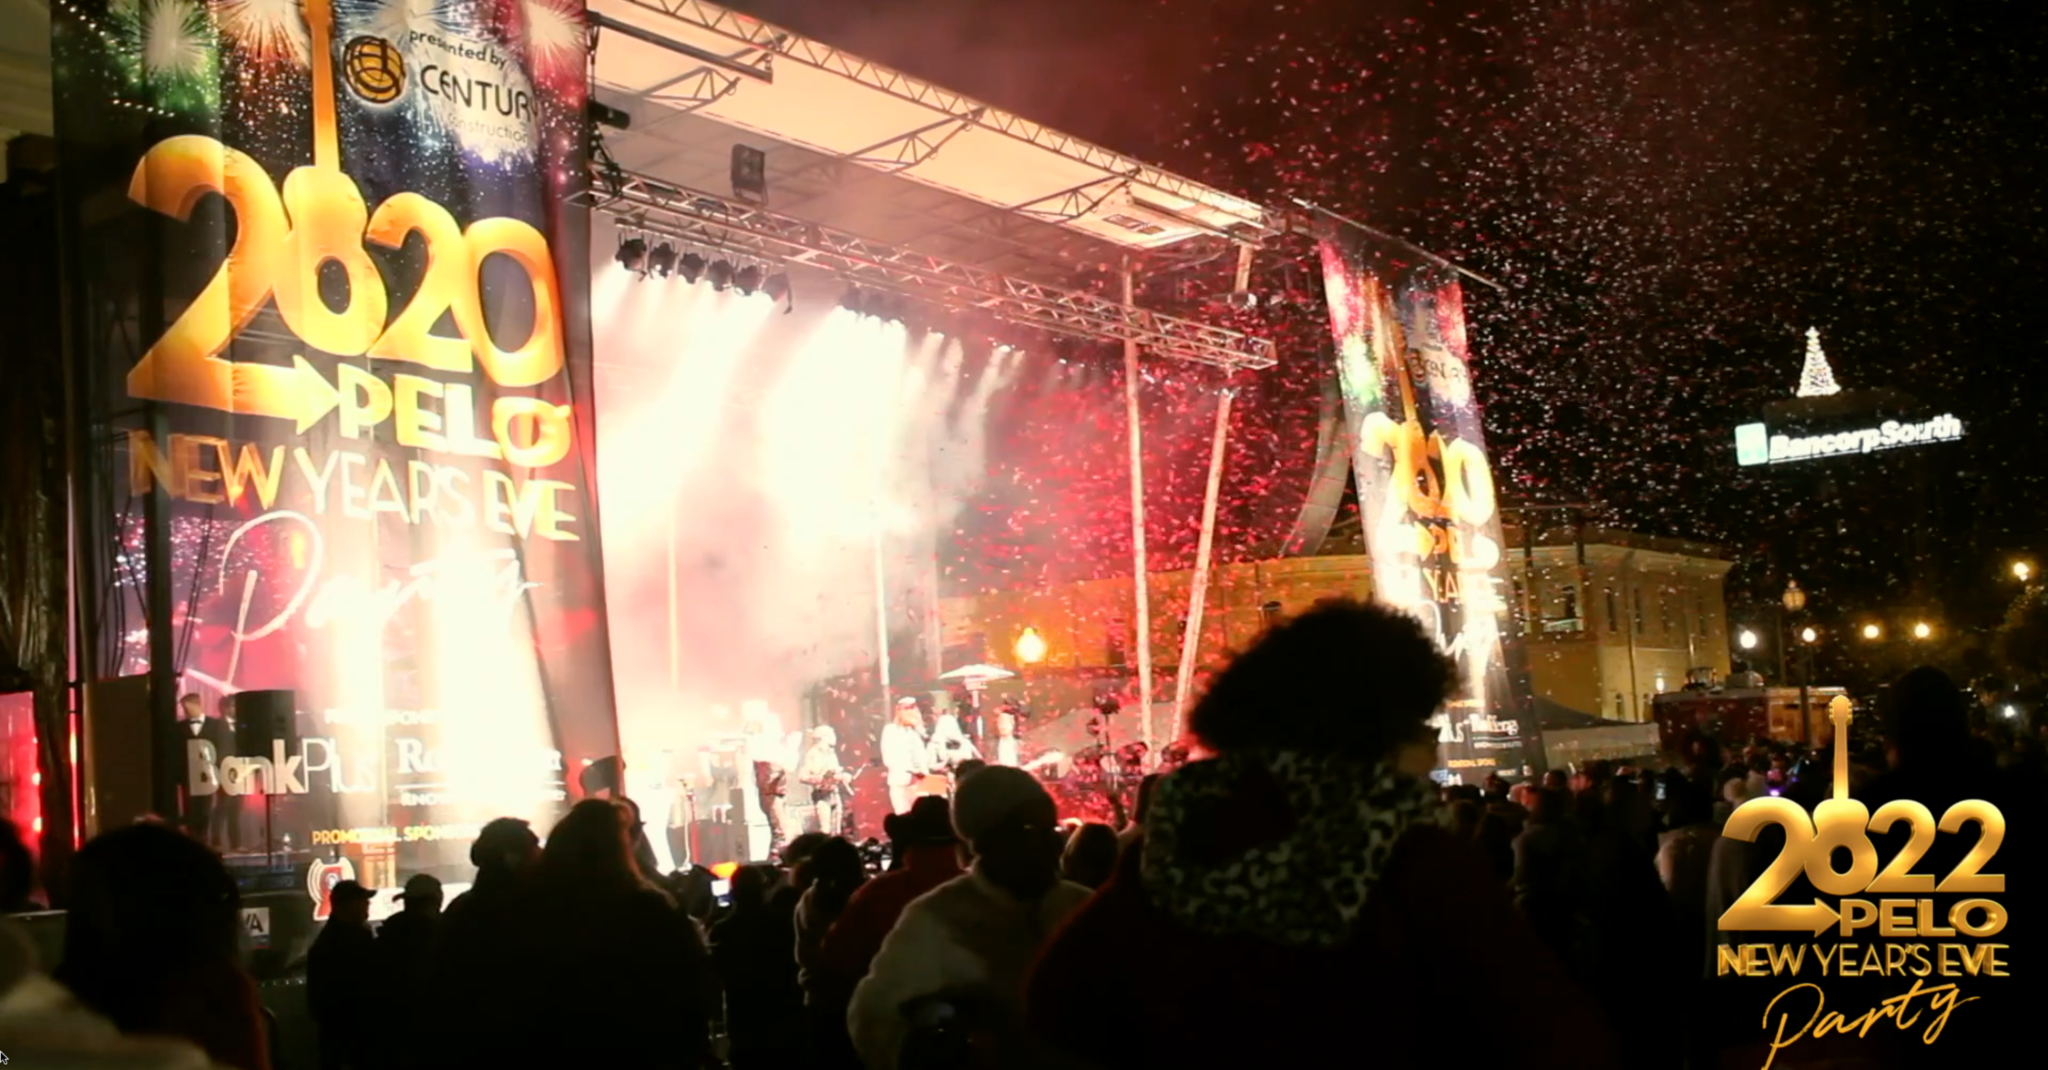 Ring in the New Year at the ULTIMATE New Year’s Eve party in Tupelo, MS—learn more